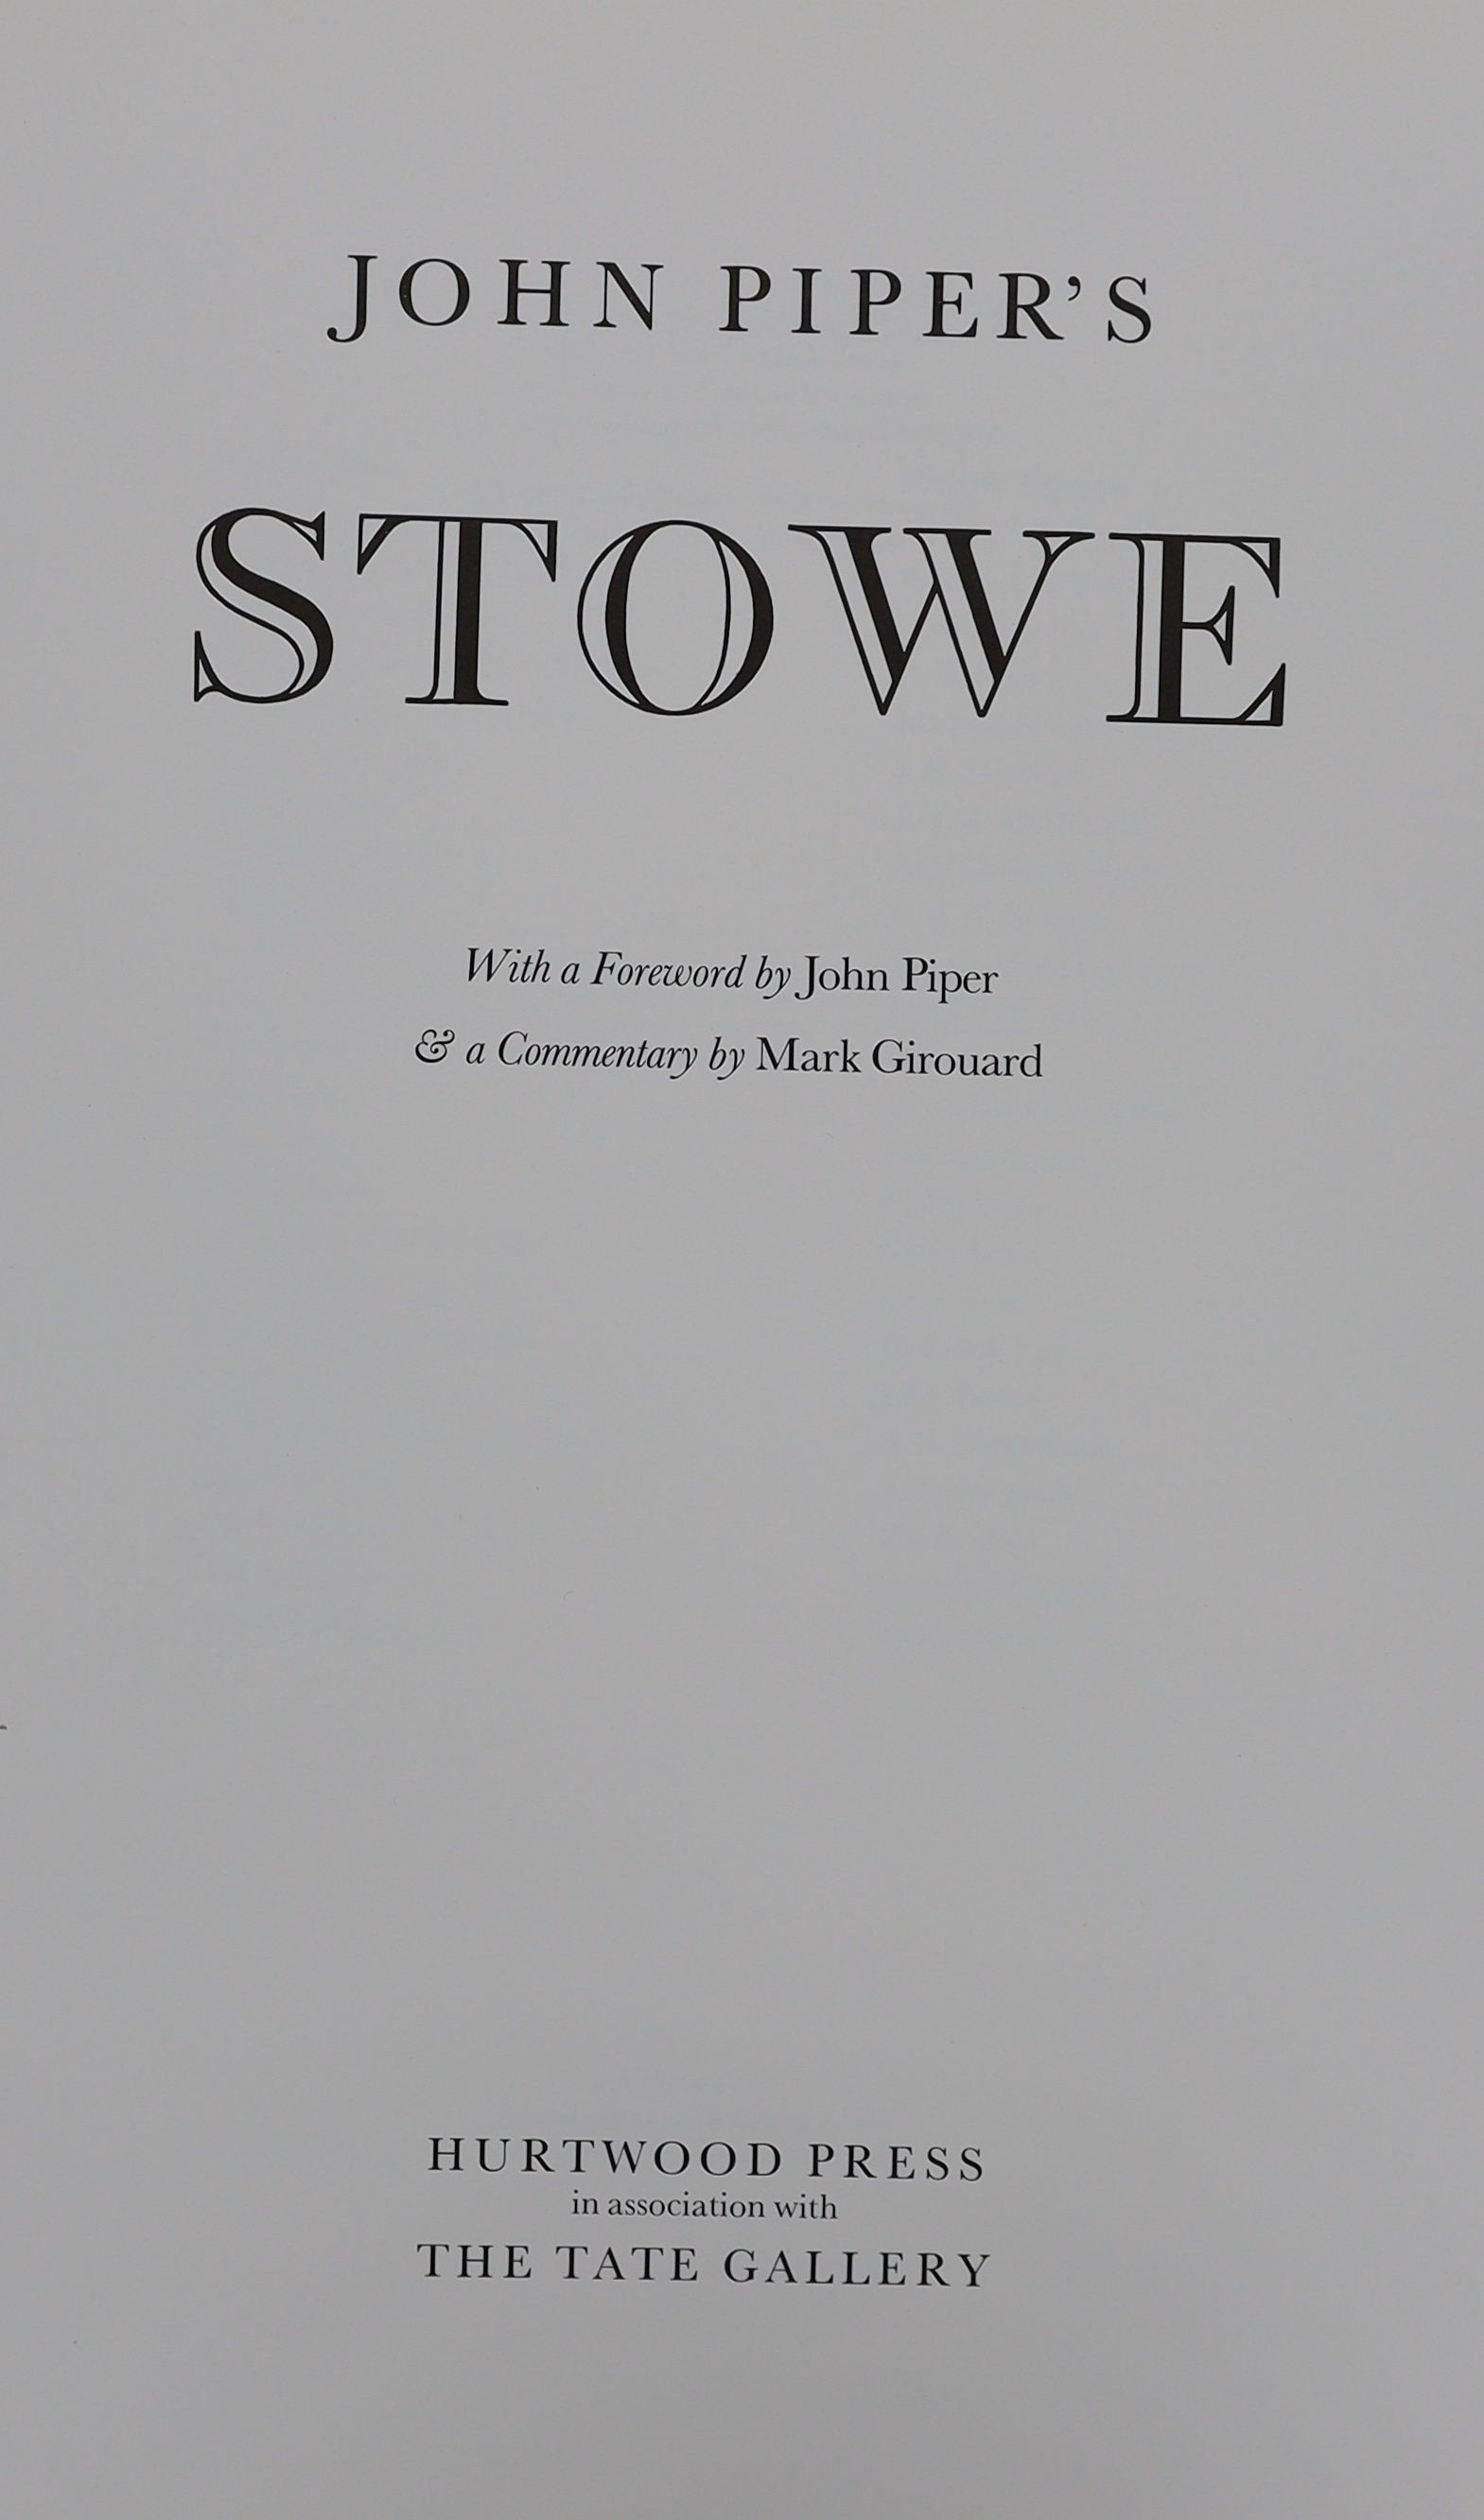 Piper, John - John Piper’s Stowe, one of 300 signed by the artist, elephant folio, original marbled cloth, Hurtwood Press in association with the Tate Gallery, London, 1983